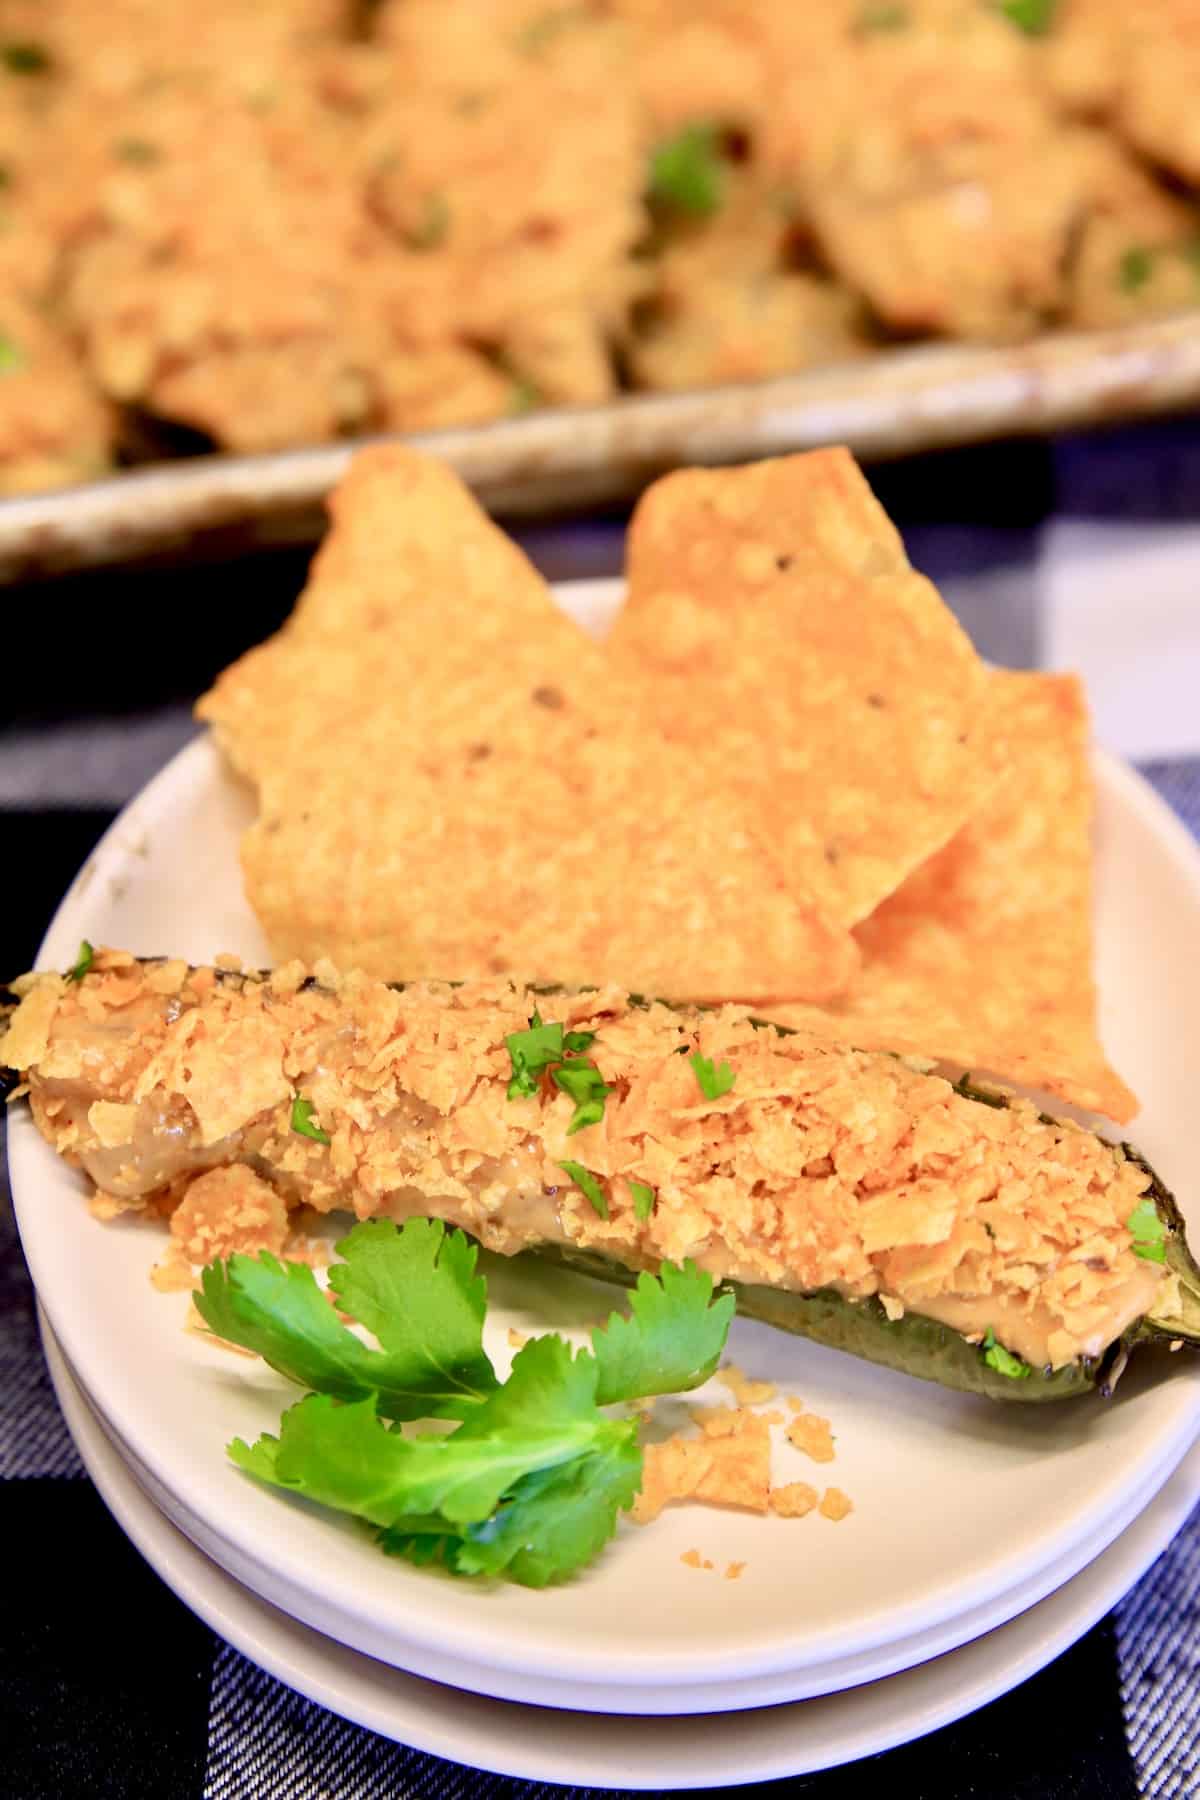 Appetizer plate with Doritos and Nacho Cheese Jalapeno Popper.